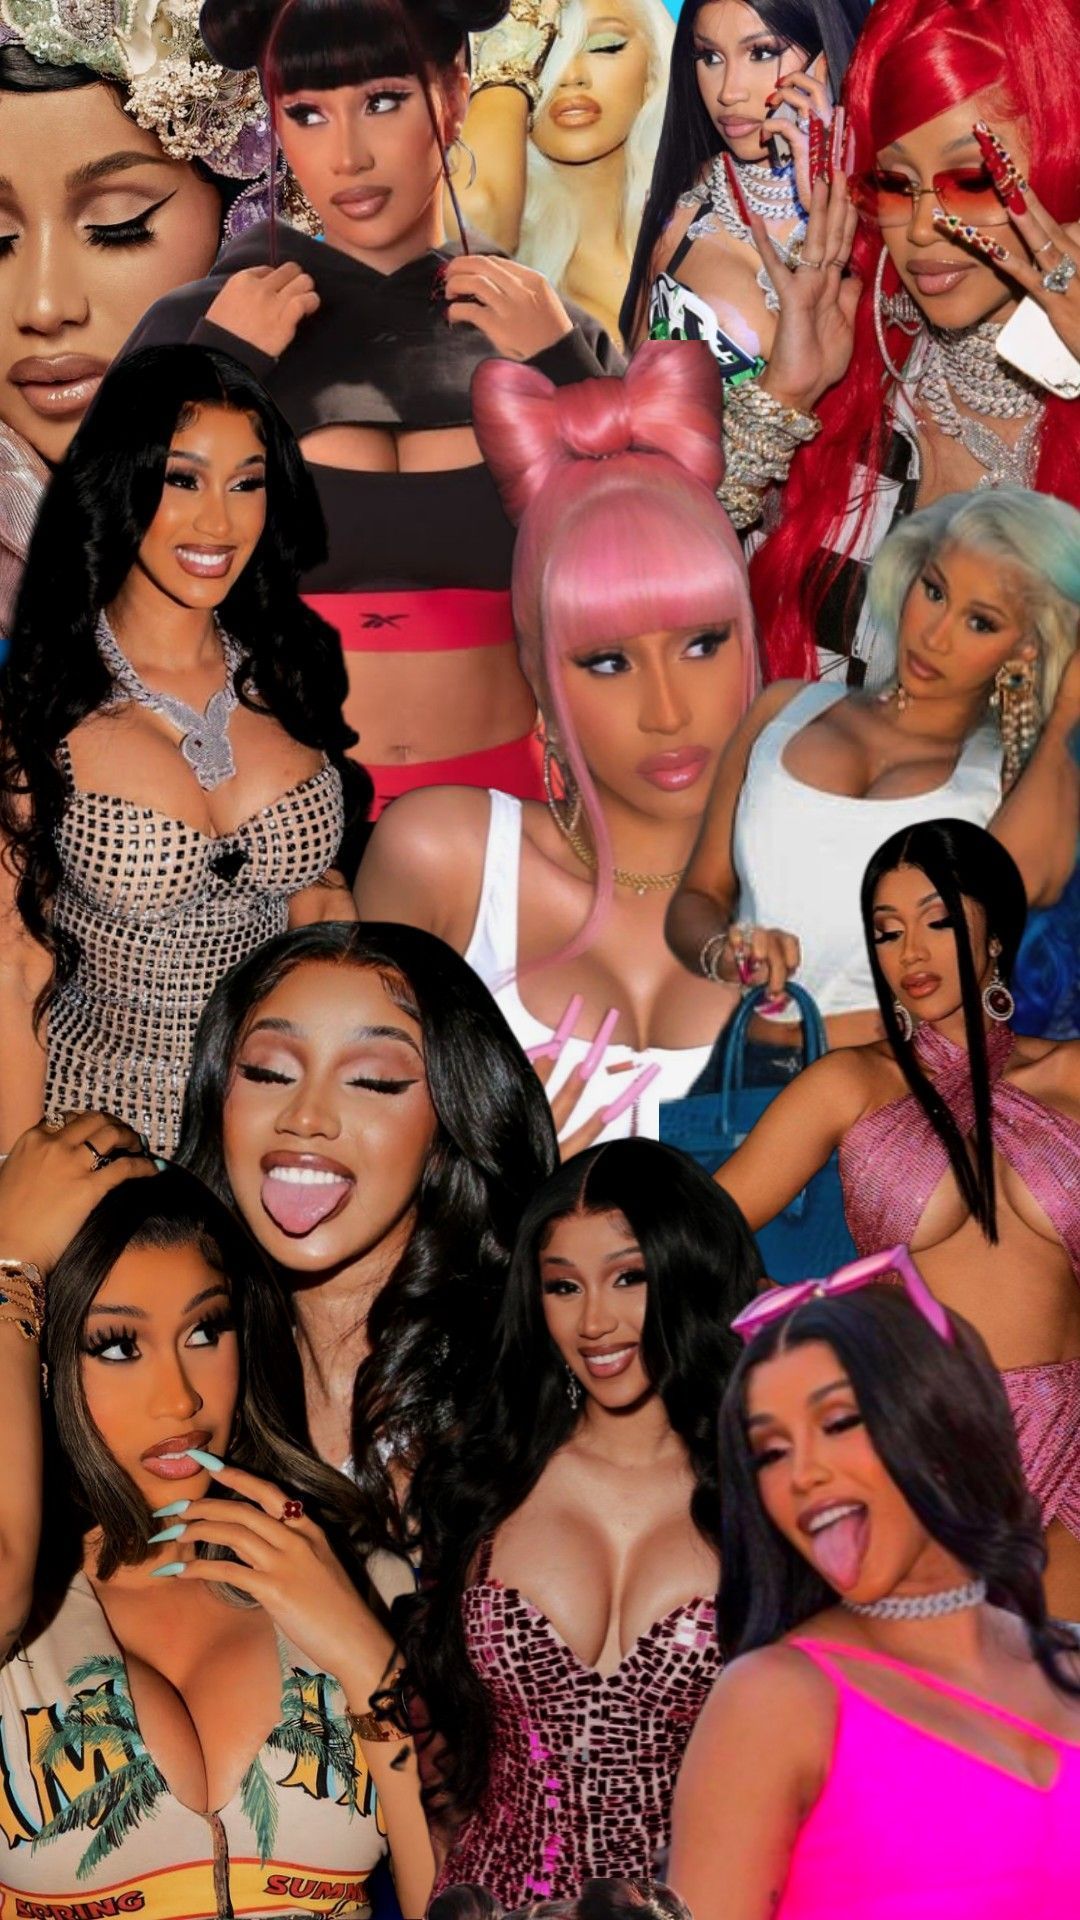 A collage of Nicki Minaj in different outfits and hairstyles - Cardi B